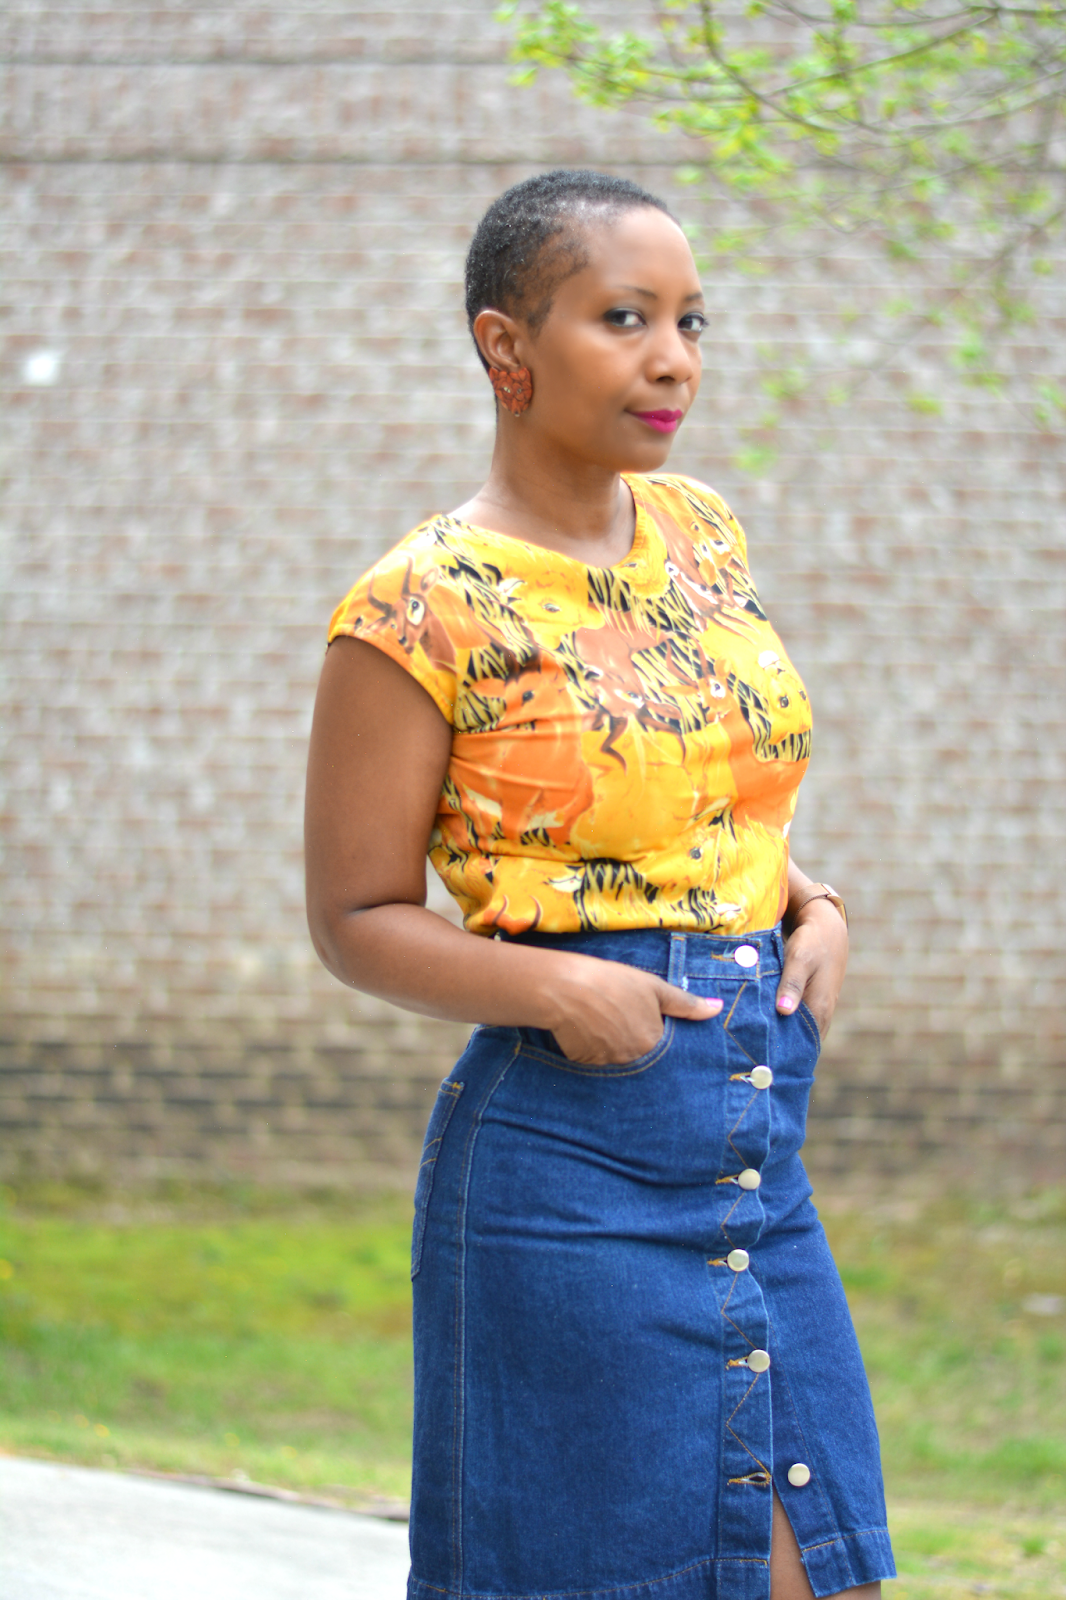 Thrift style featuring vintage button front jean skirt and safari animal print top.